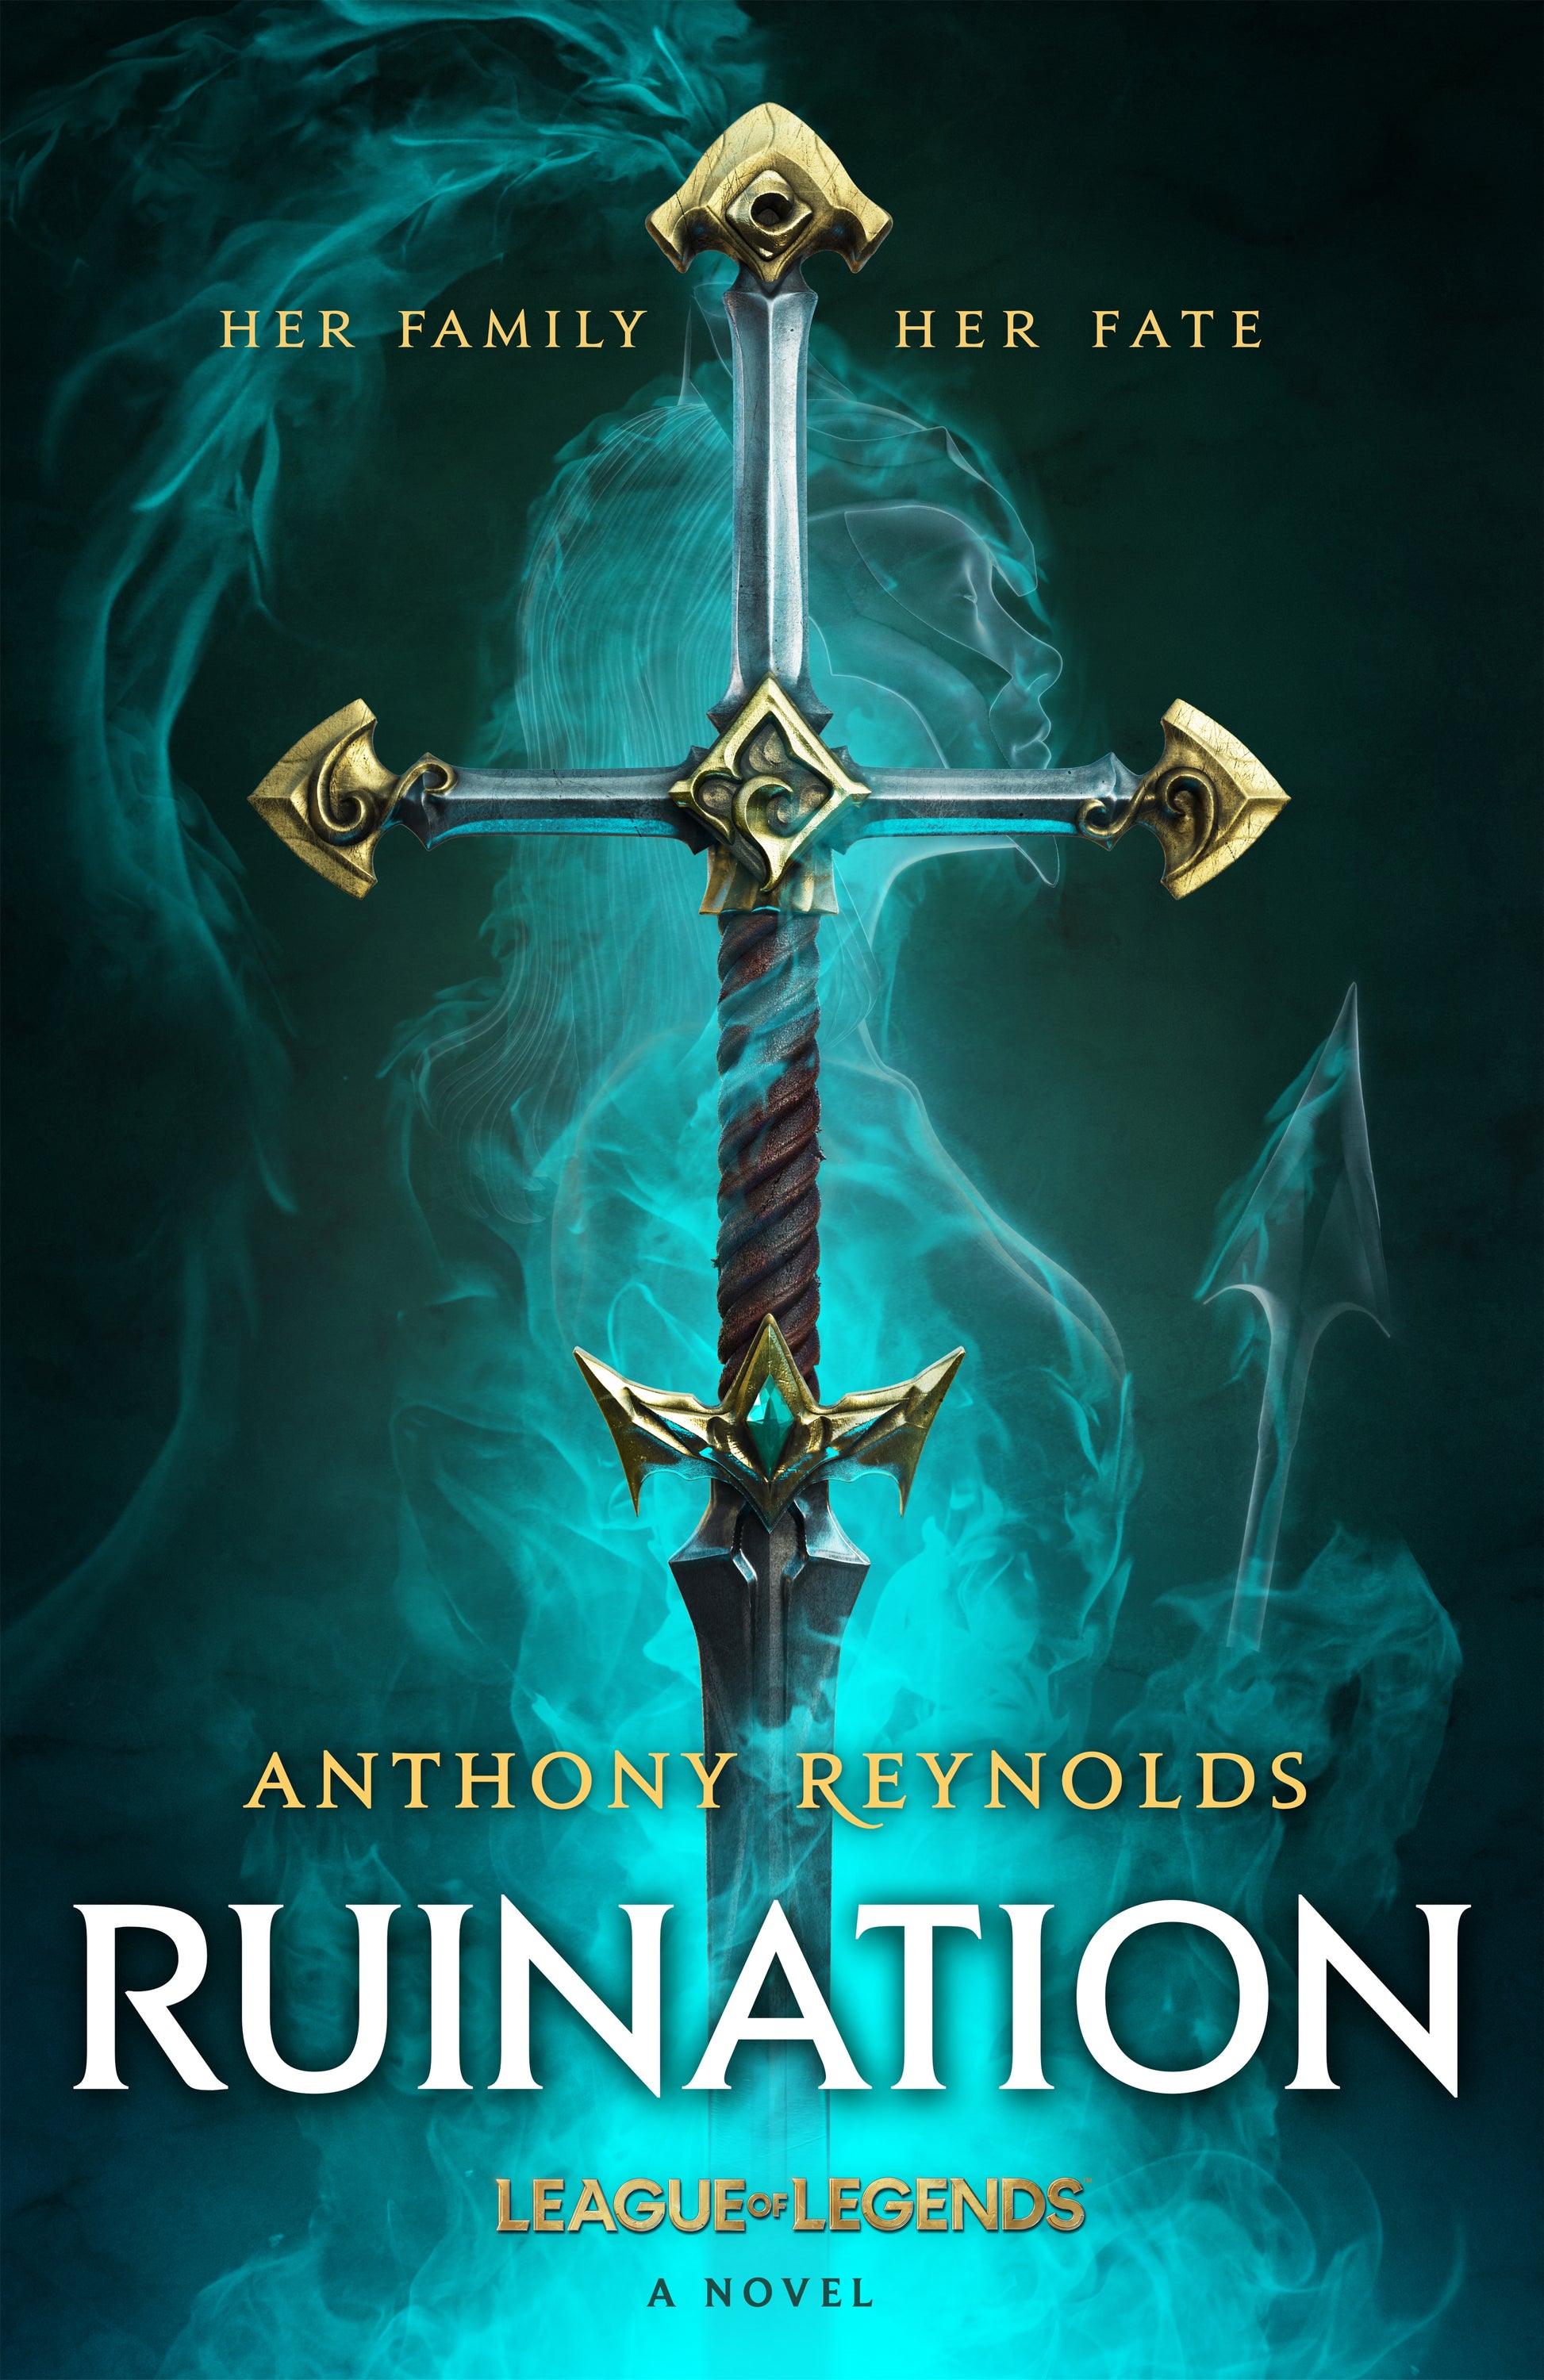 Ruination: A League of Legends Novel by Anthony Reynolds